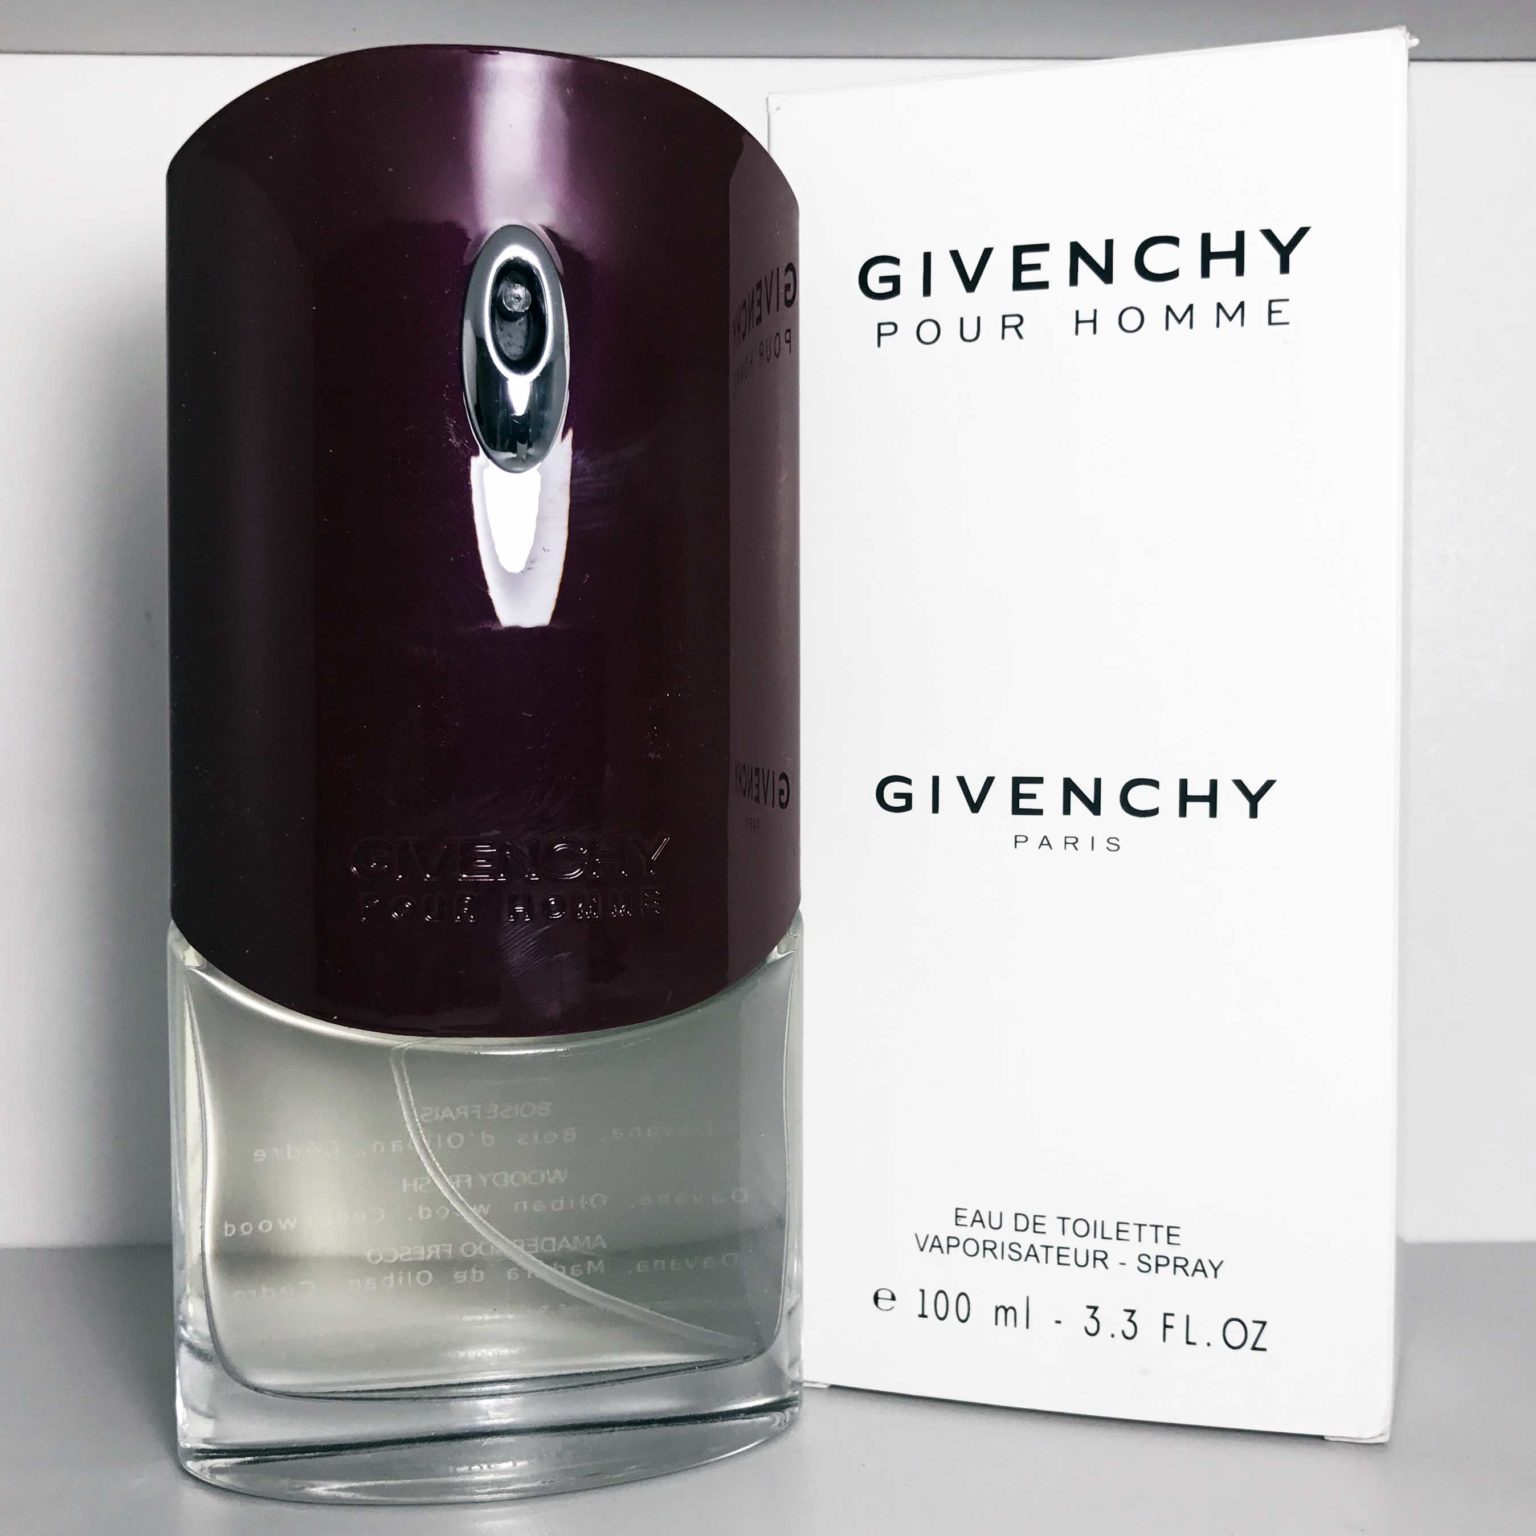 Givenchy pour homme тестер 100. Tester Givenchy pour homme 100 мл коробка. Парфюм Givenchy pour homme. Духи мужские Givenchy pour homme 50ml тестер. Туалетная вода givenchy givenchy pour